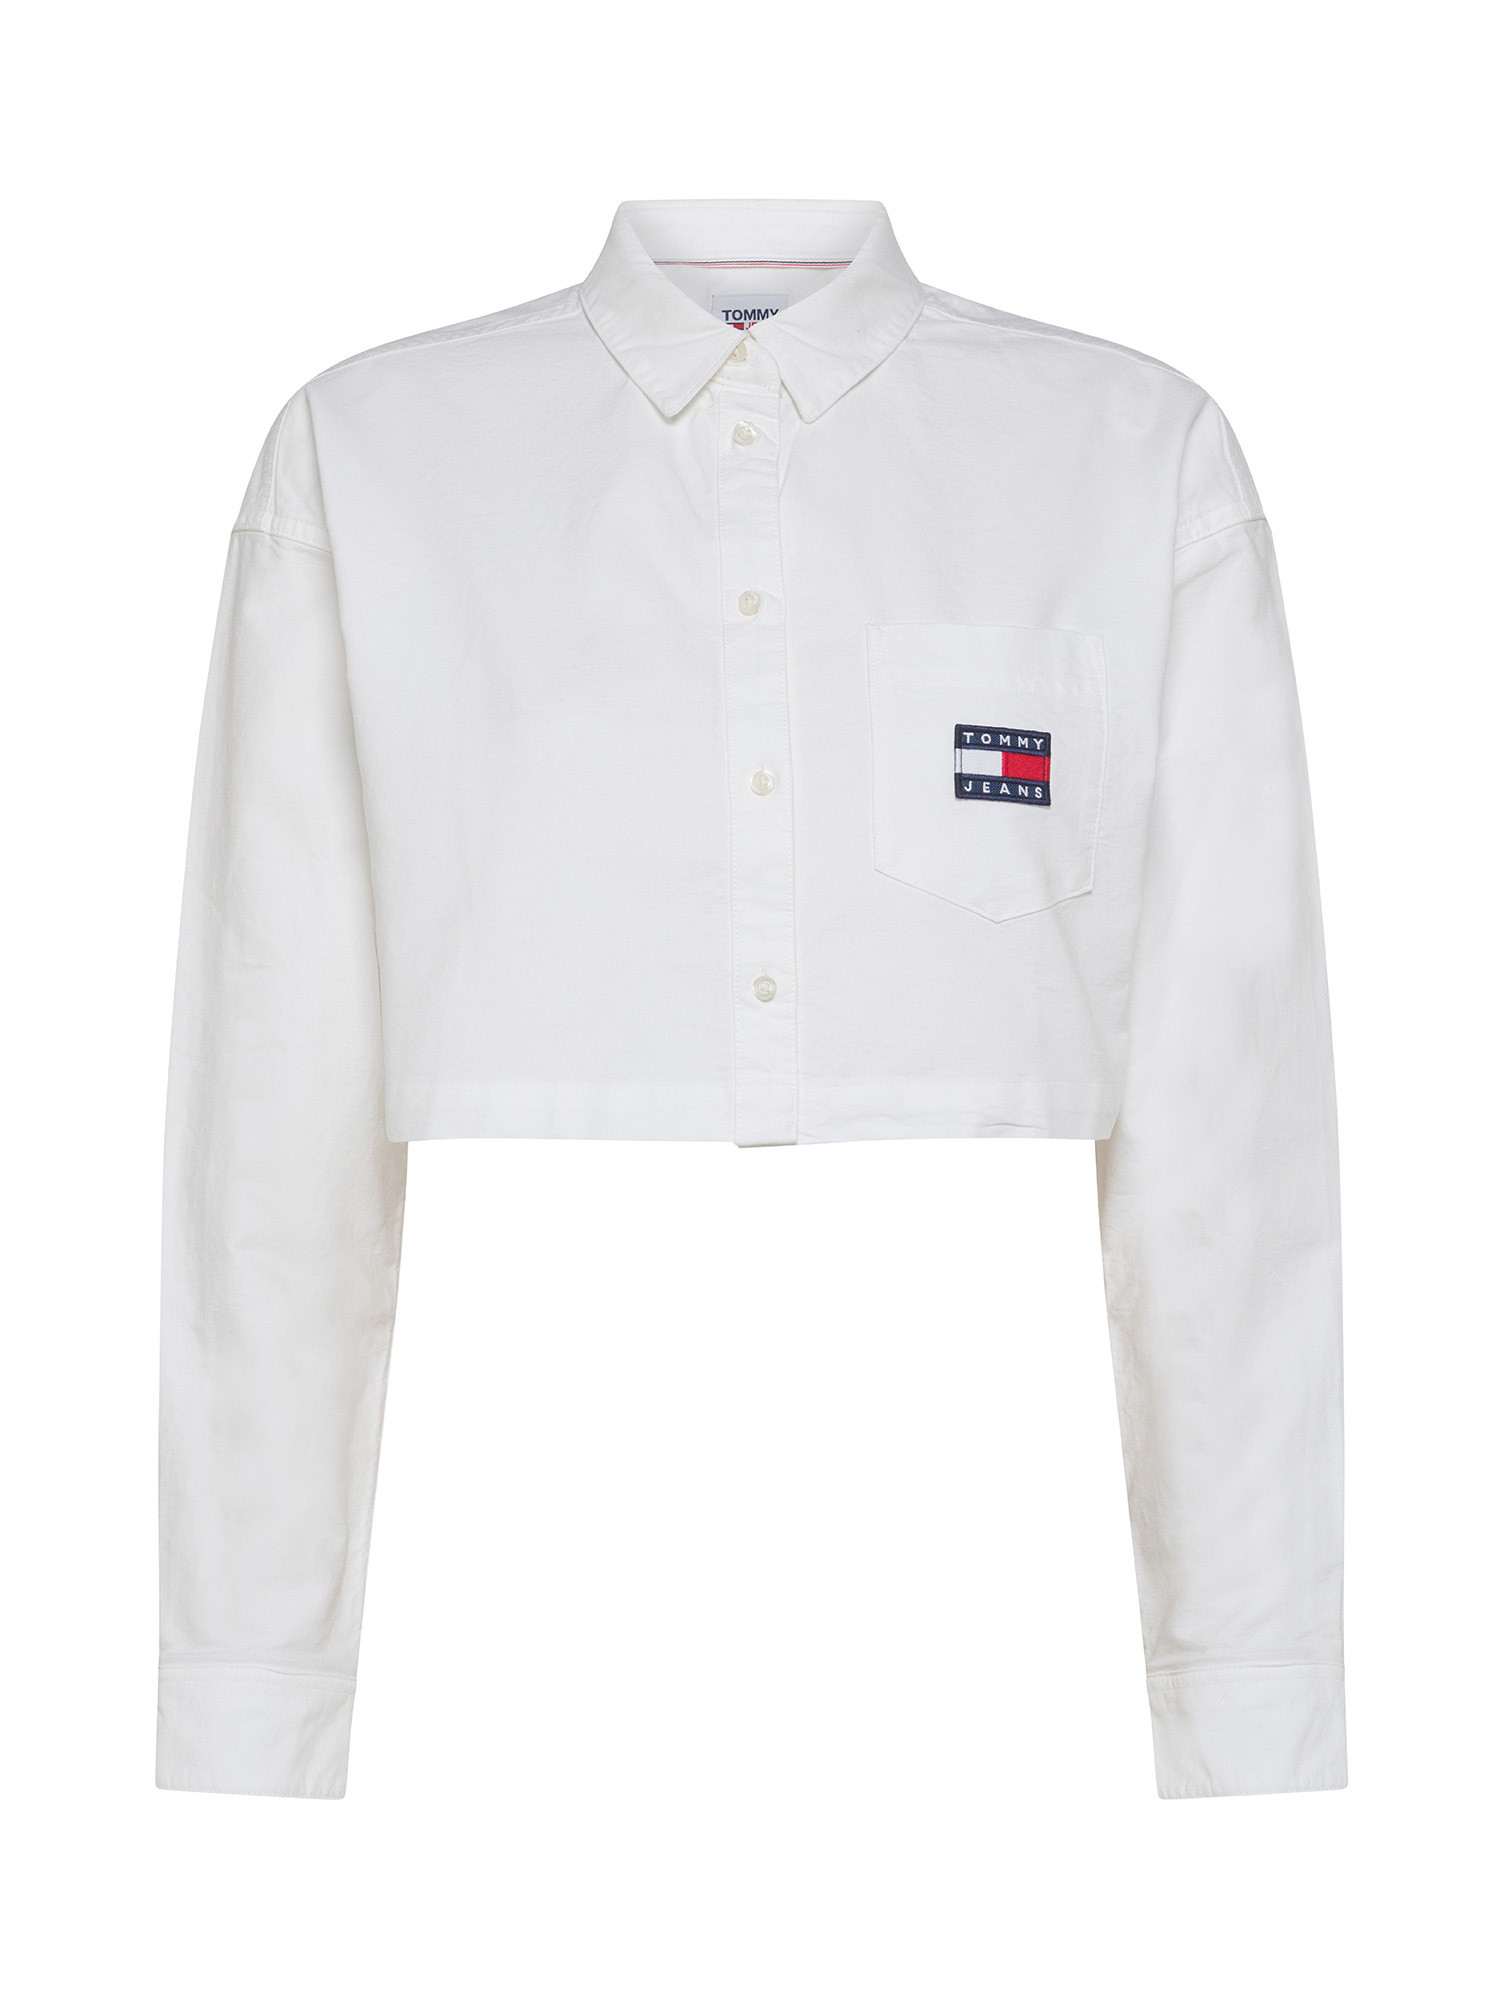 Tommy Jeans - Cropped shirt with logo on the pocket, White, large image number 0